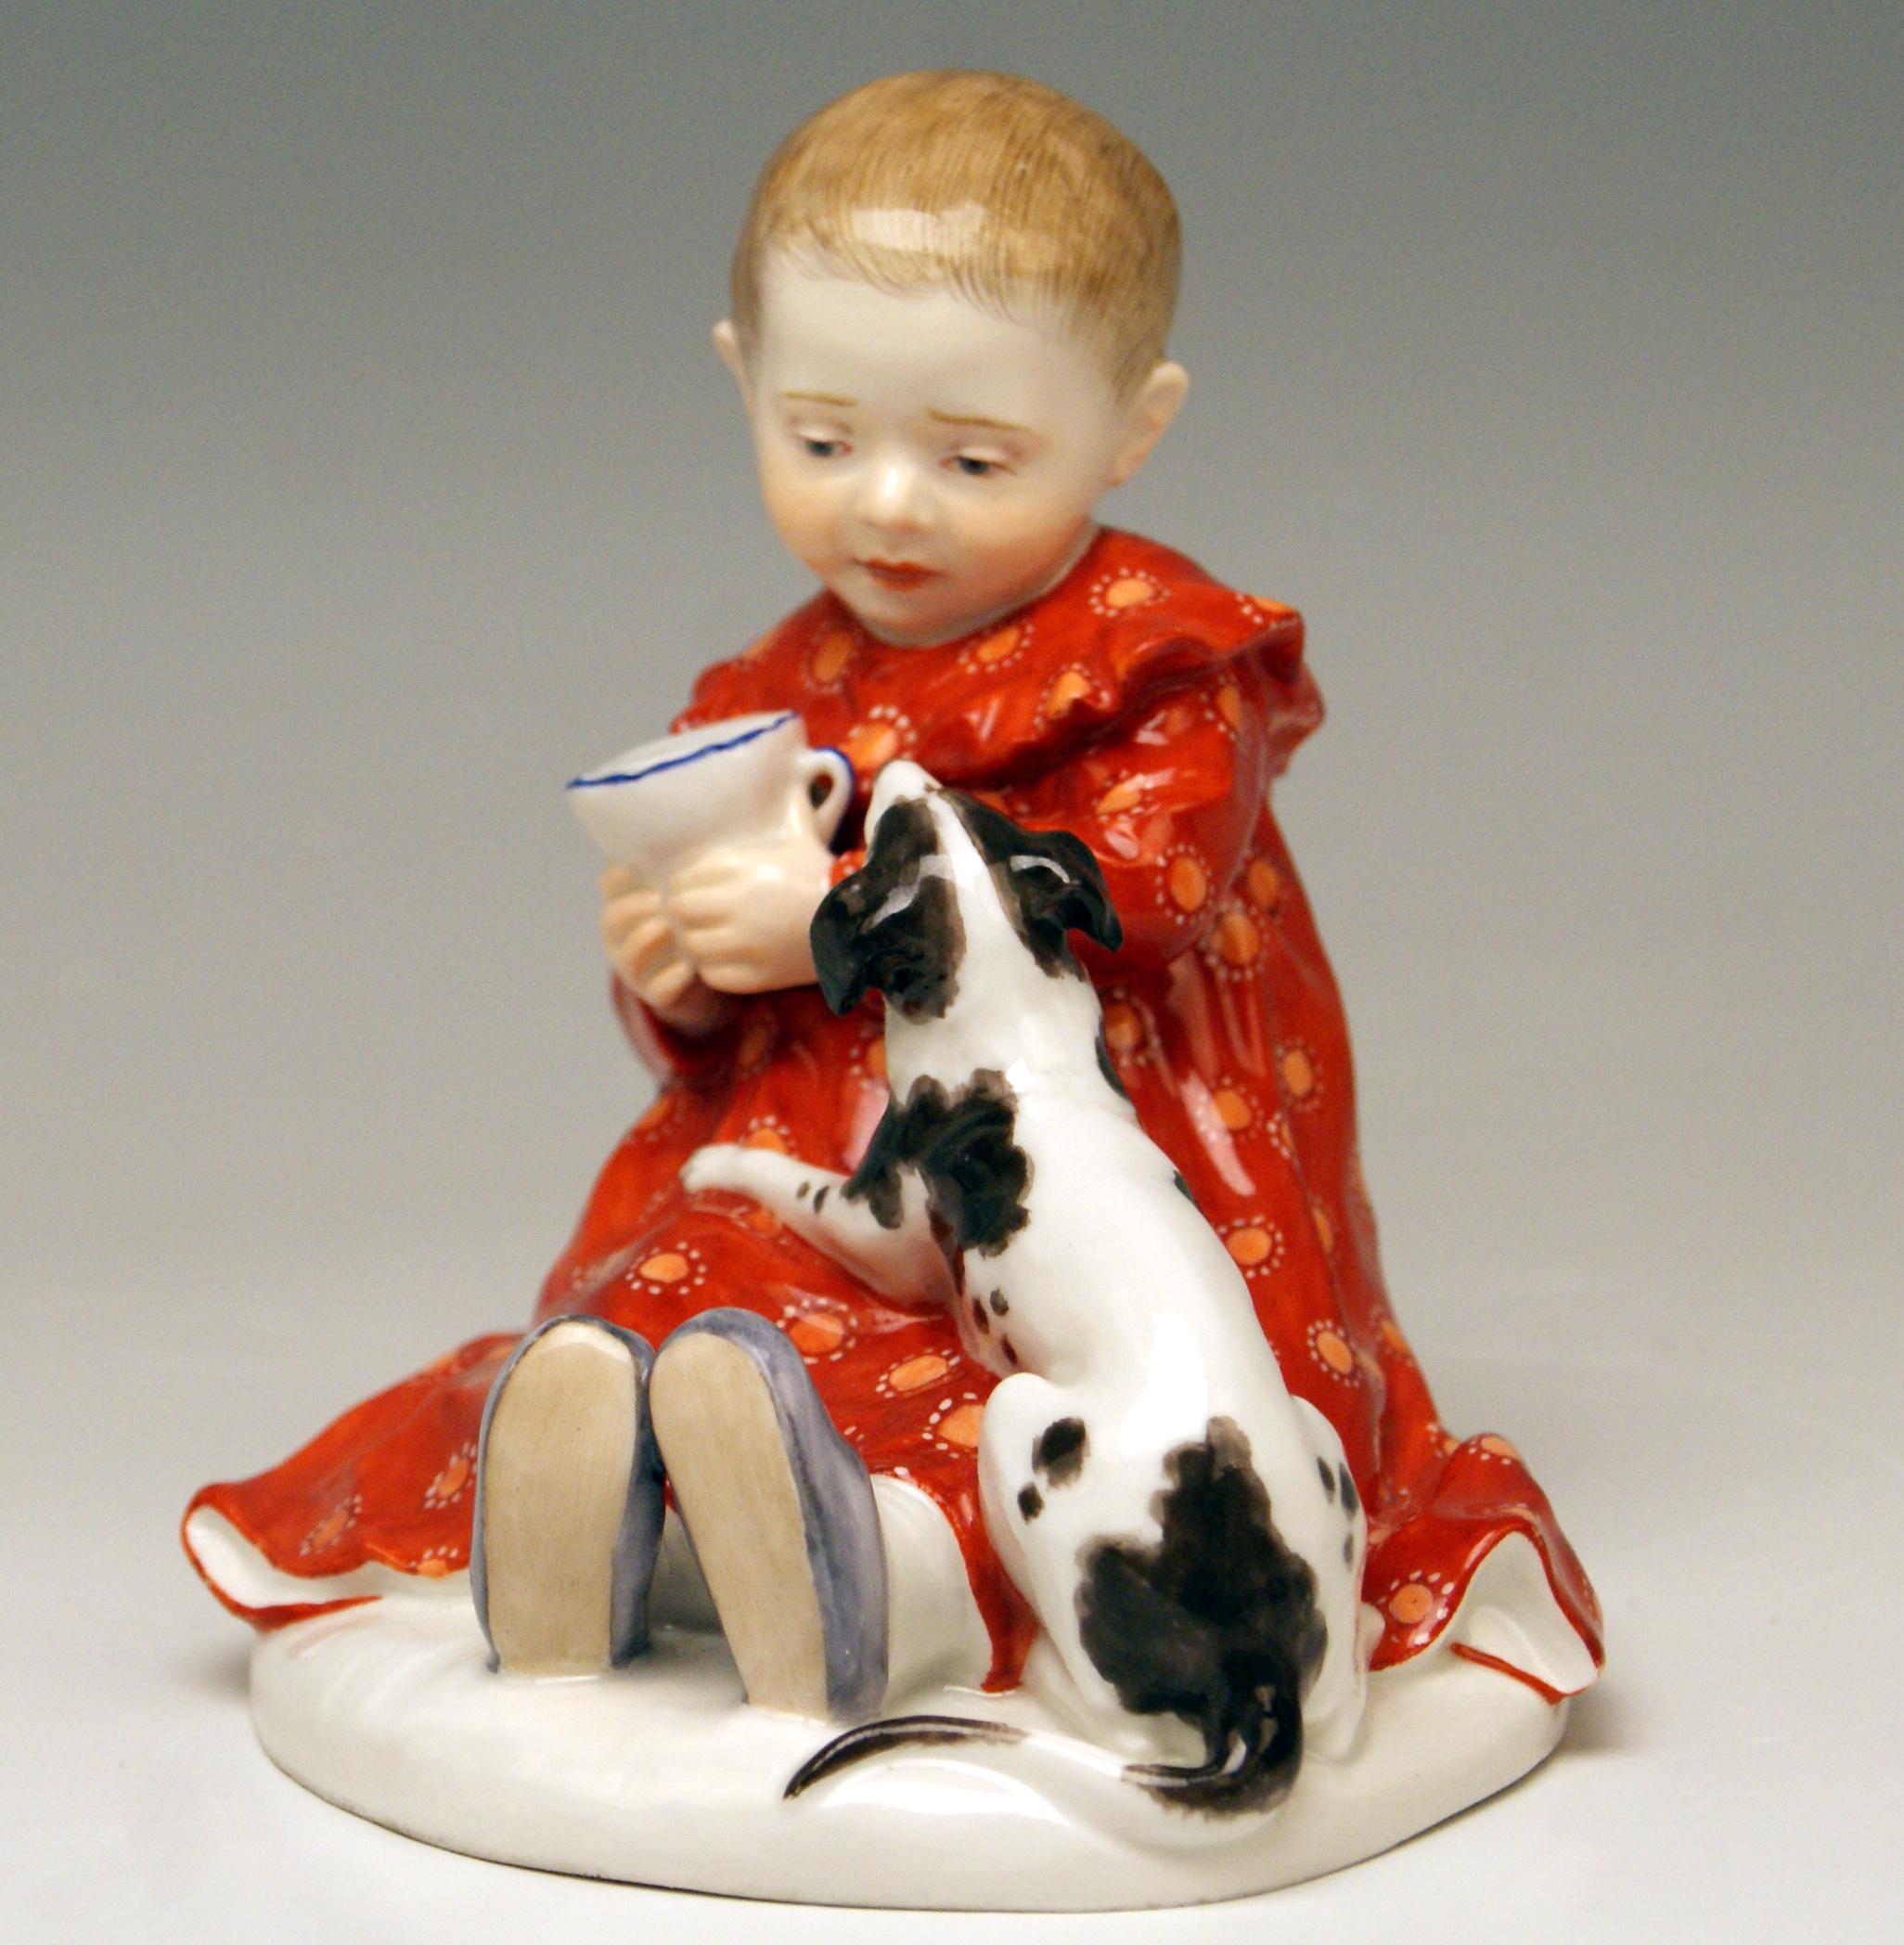 Meissen lovely child figurine: baby with dog sitting on ground
Model A 234

Measures:
Height: 4.72 inches (= 12.0 cm)
Depth: 4.52 inches (= 11.5 cm)
Width: 4.13 inches (= 10.5 cm)

Manufactory: Meissen
Hallmarked: Blue Meissen Sword Mark